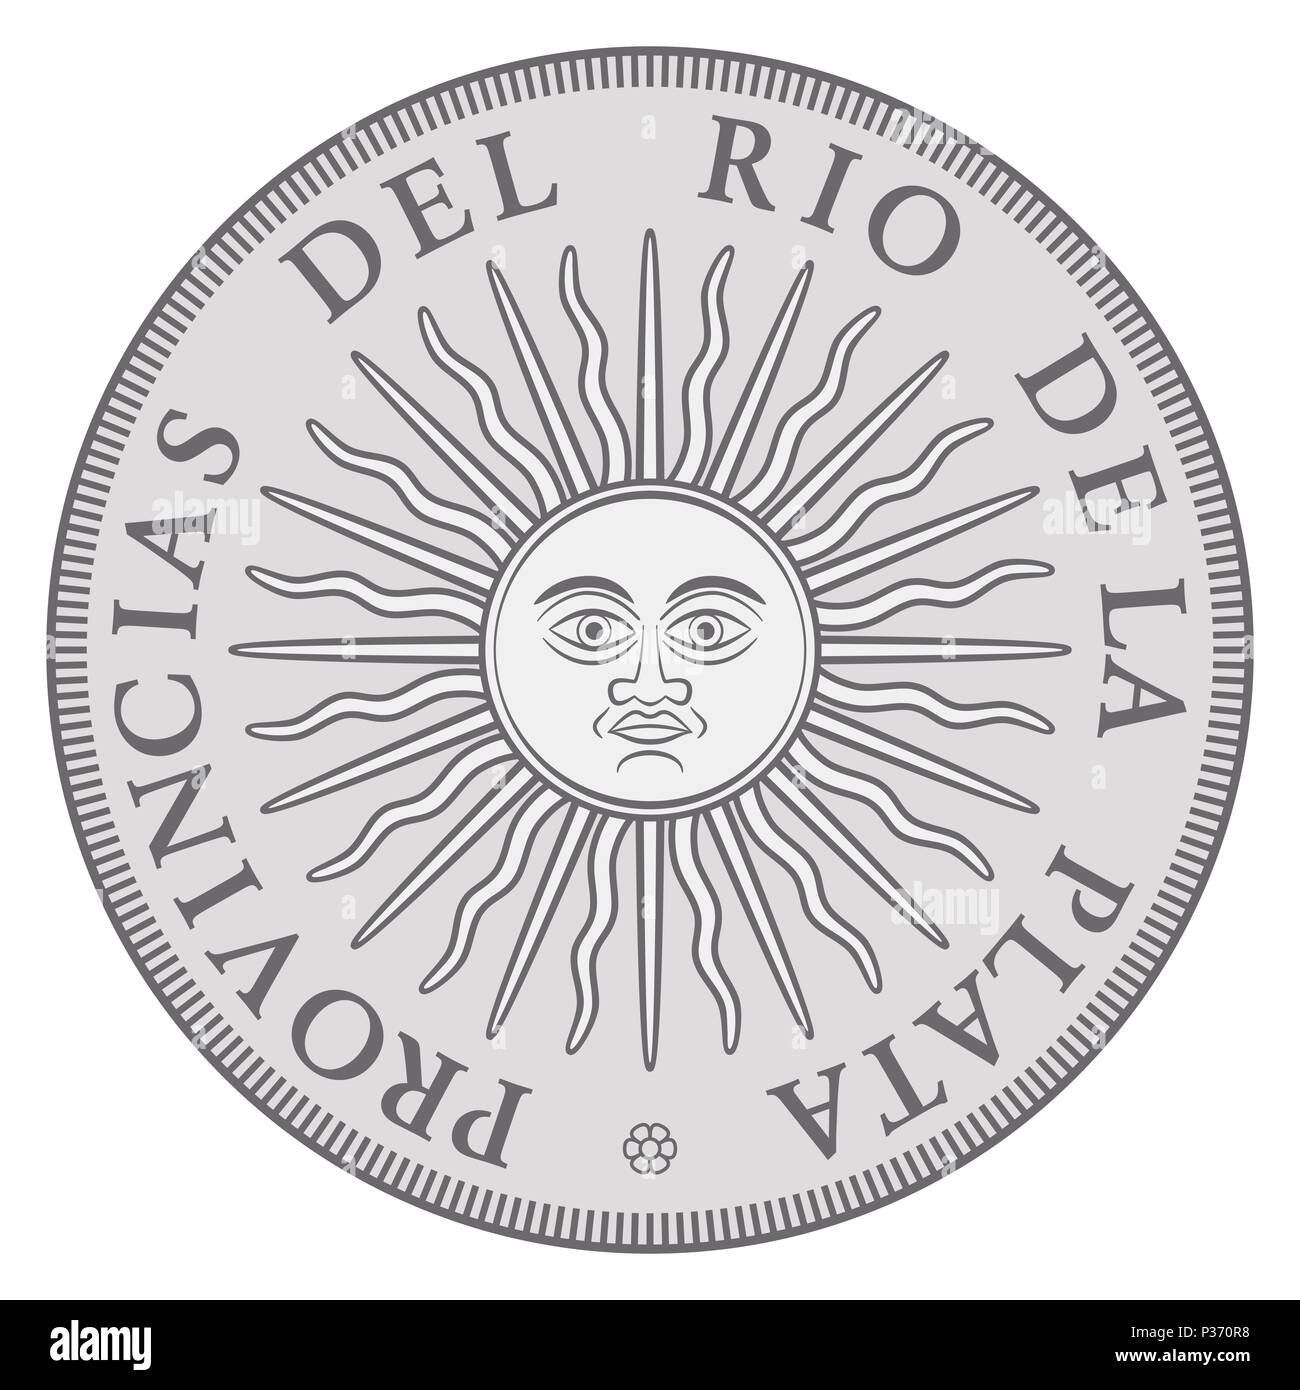 Early Argentinian silver coin with Sun of May, issued in the name of the United Province of the River Plate. Sol de Mayo, national emblem. Stock Photo